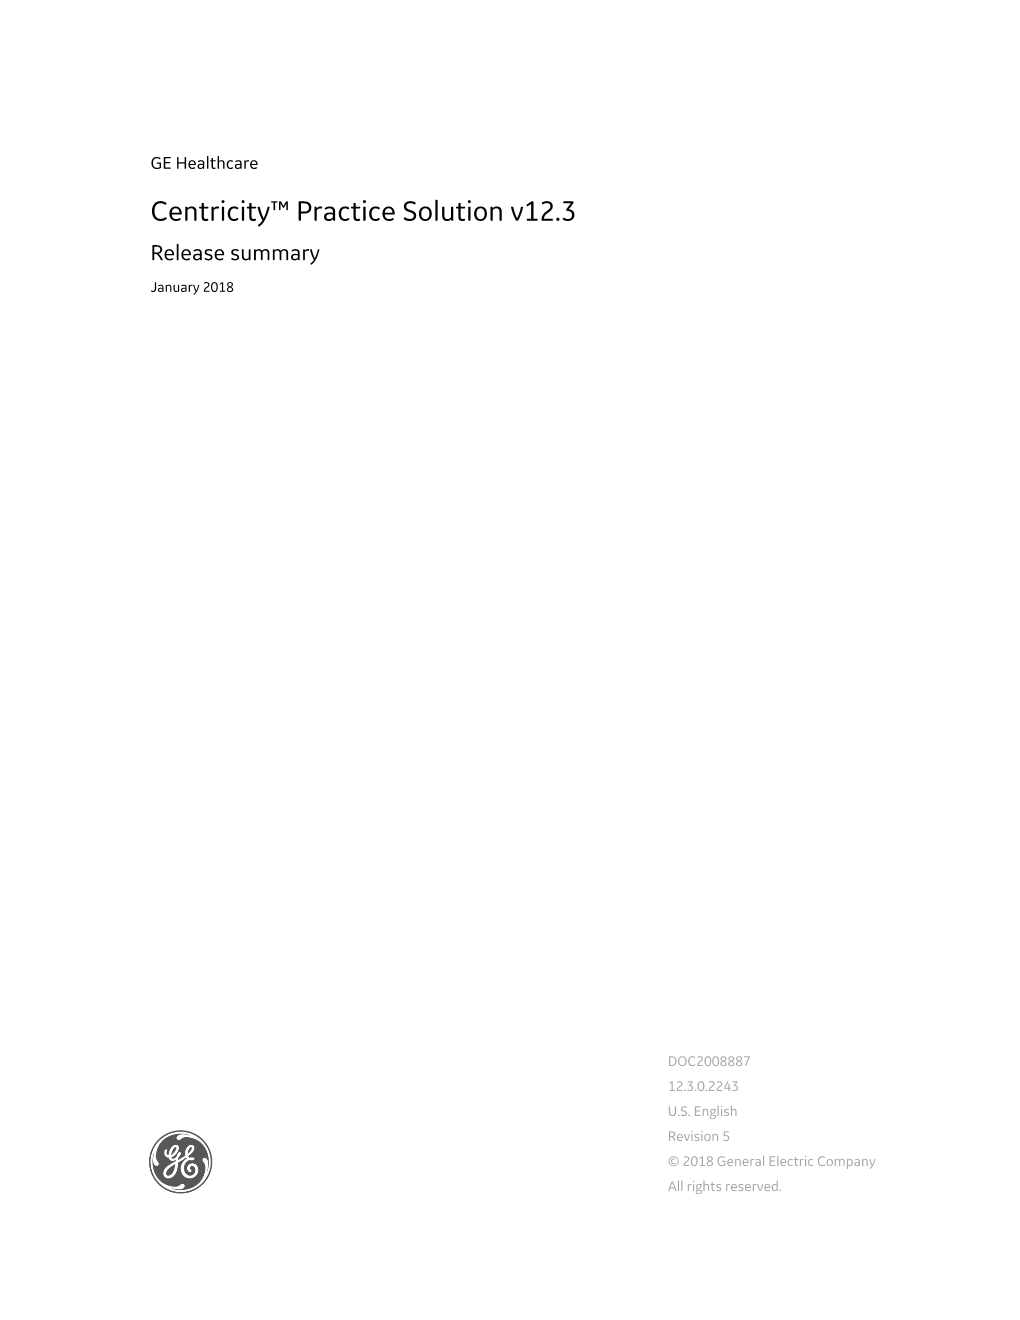 Centricity™ Practice Solution V12.3 Release Summary January 2018